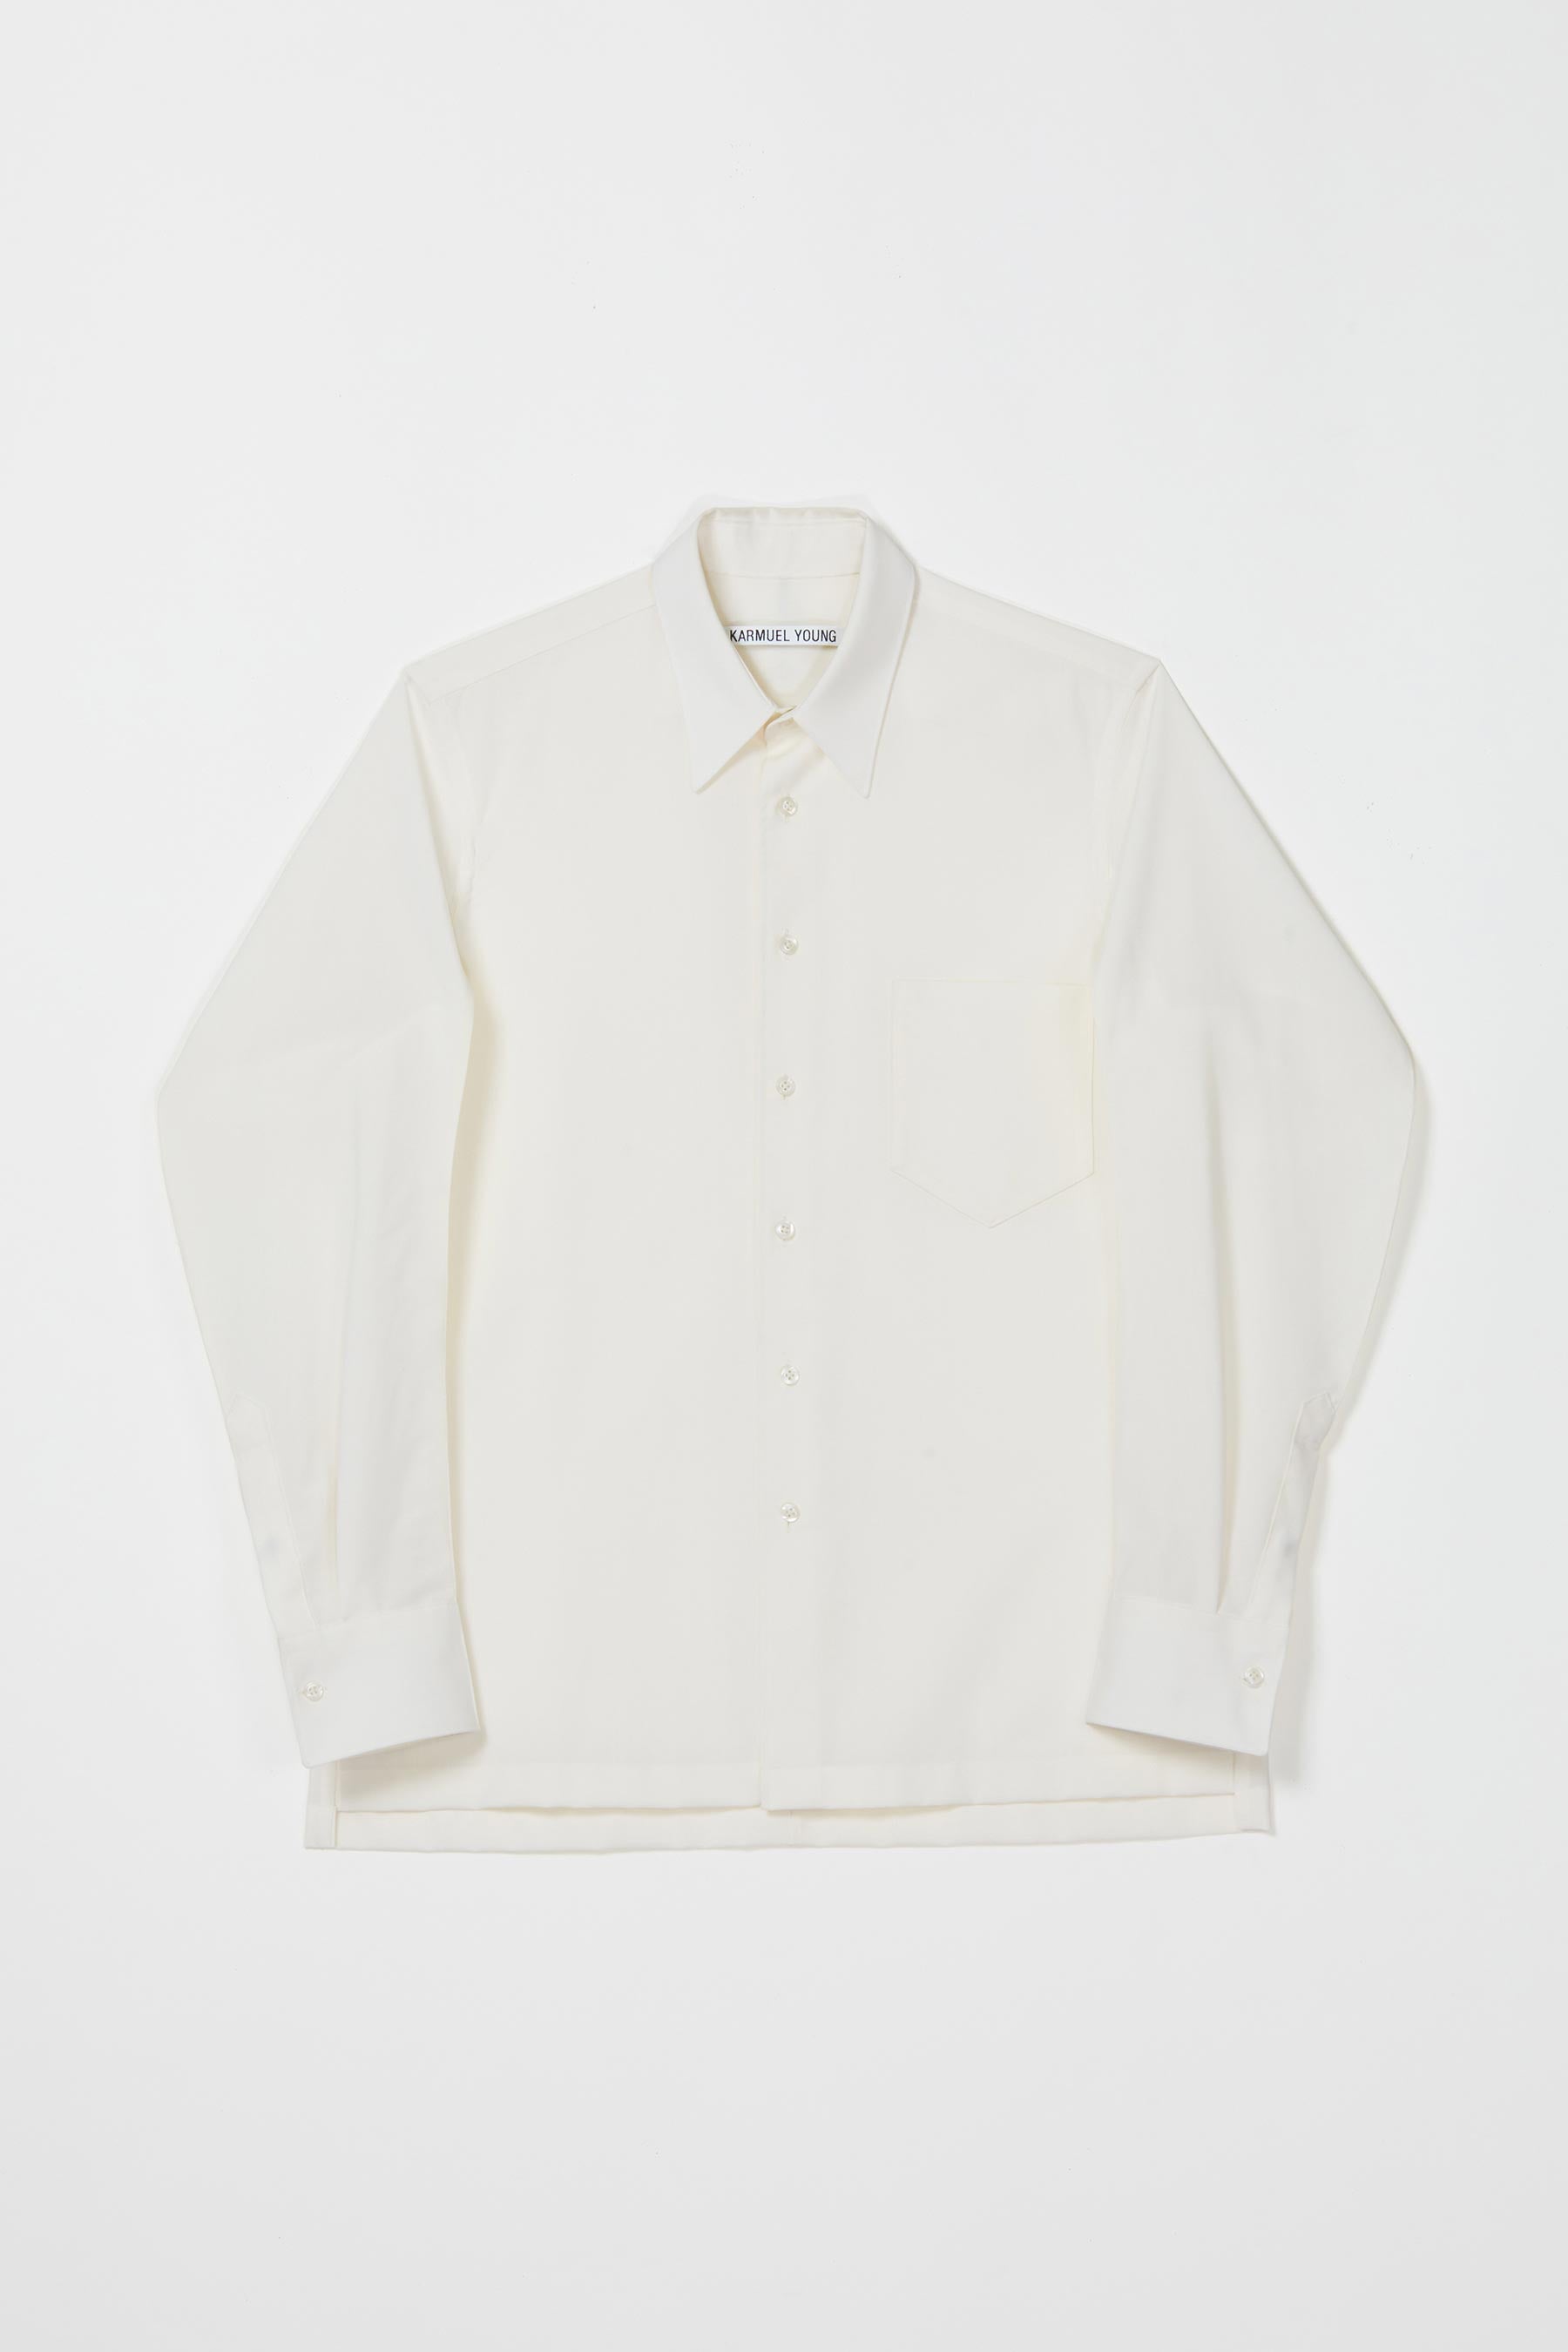 White Wool Curved Arm Shirt